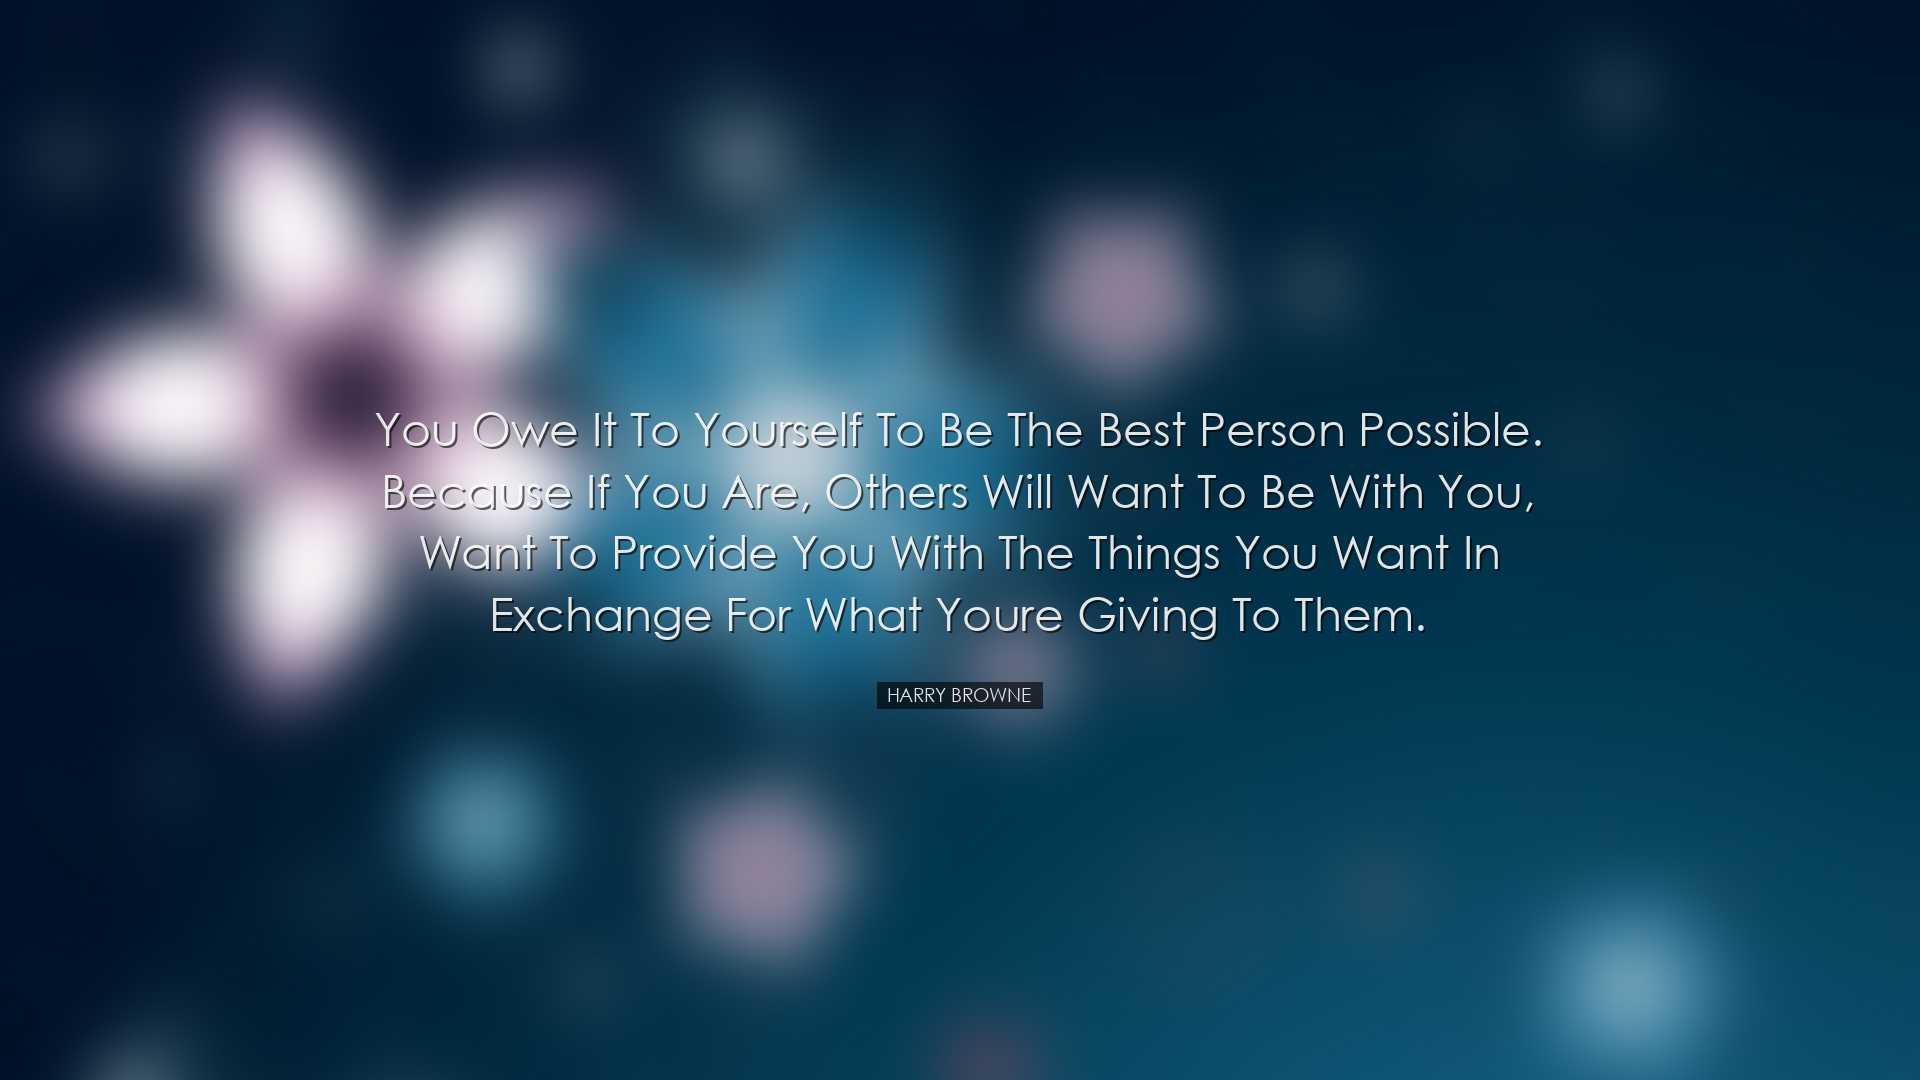 You owe it to yourself to be the best person possible. Because if